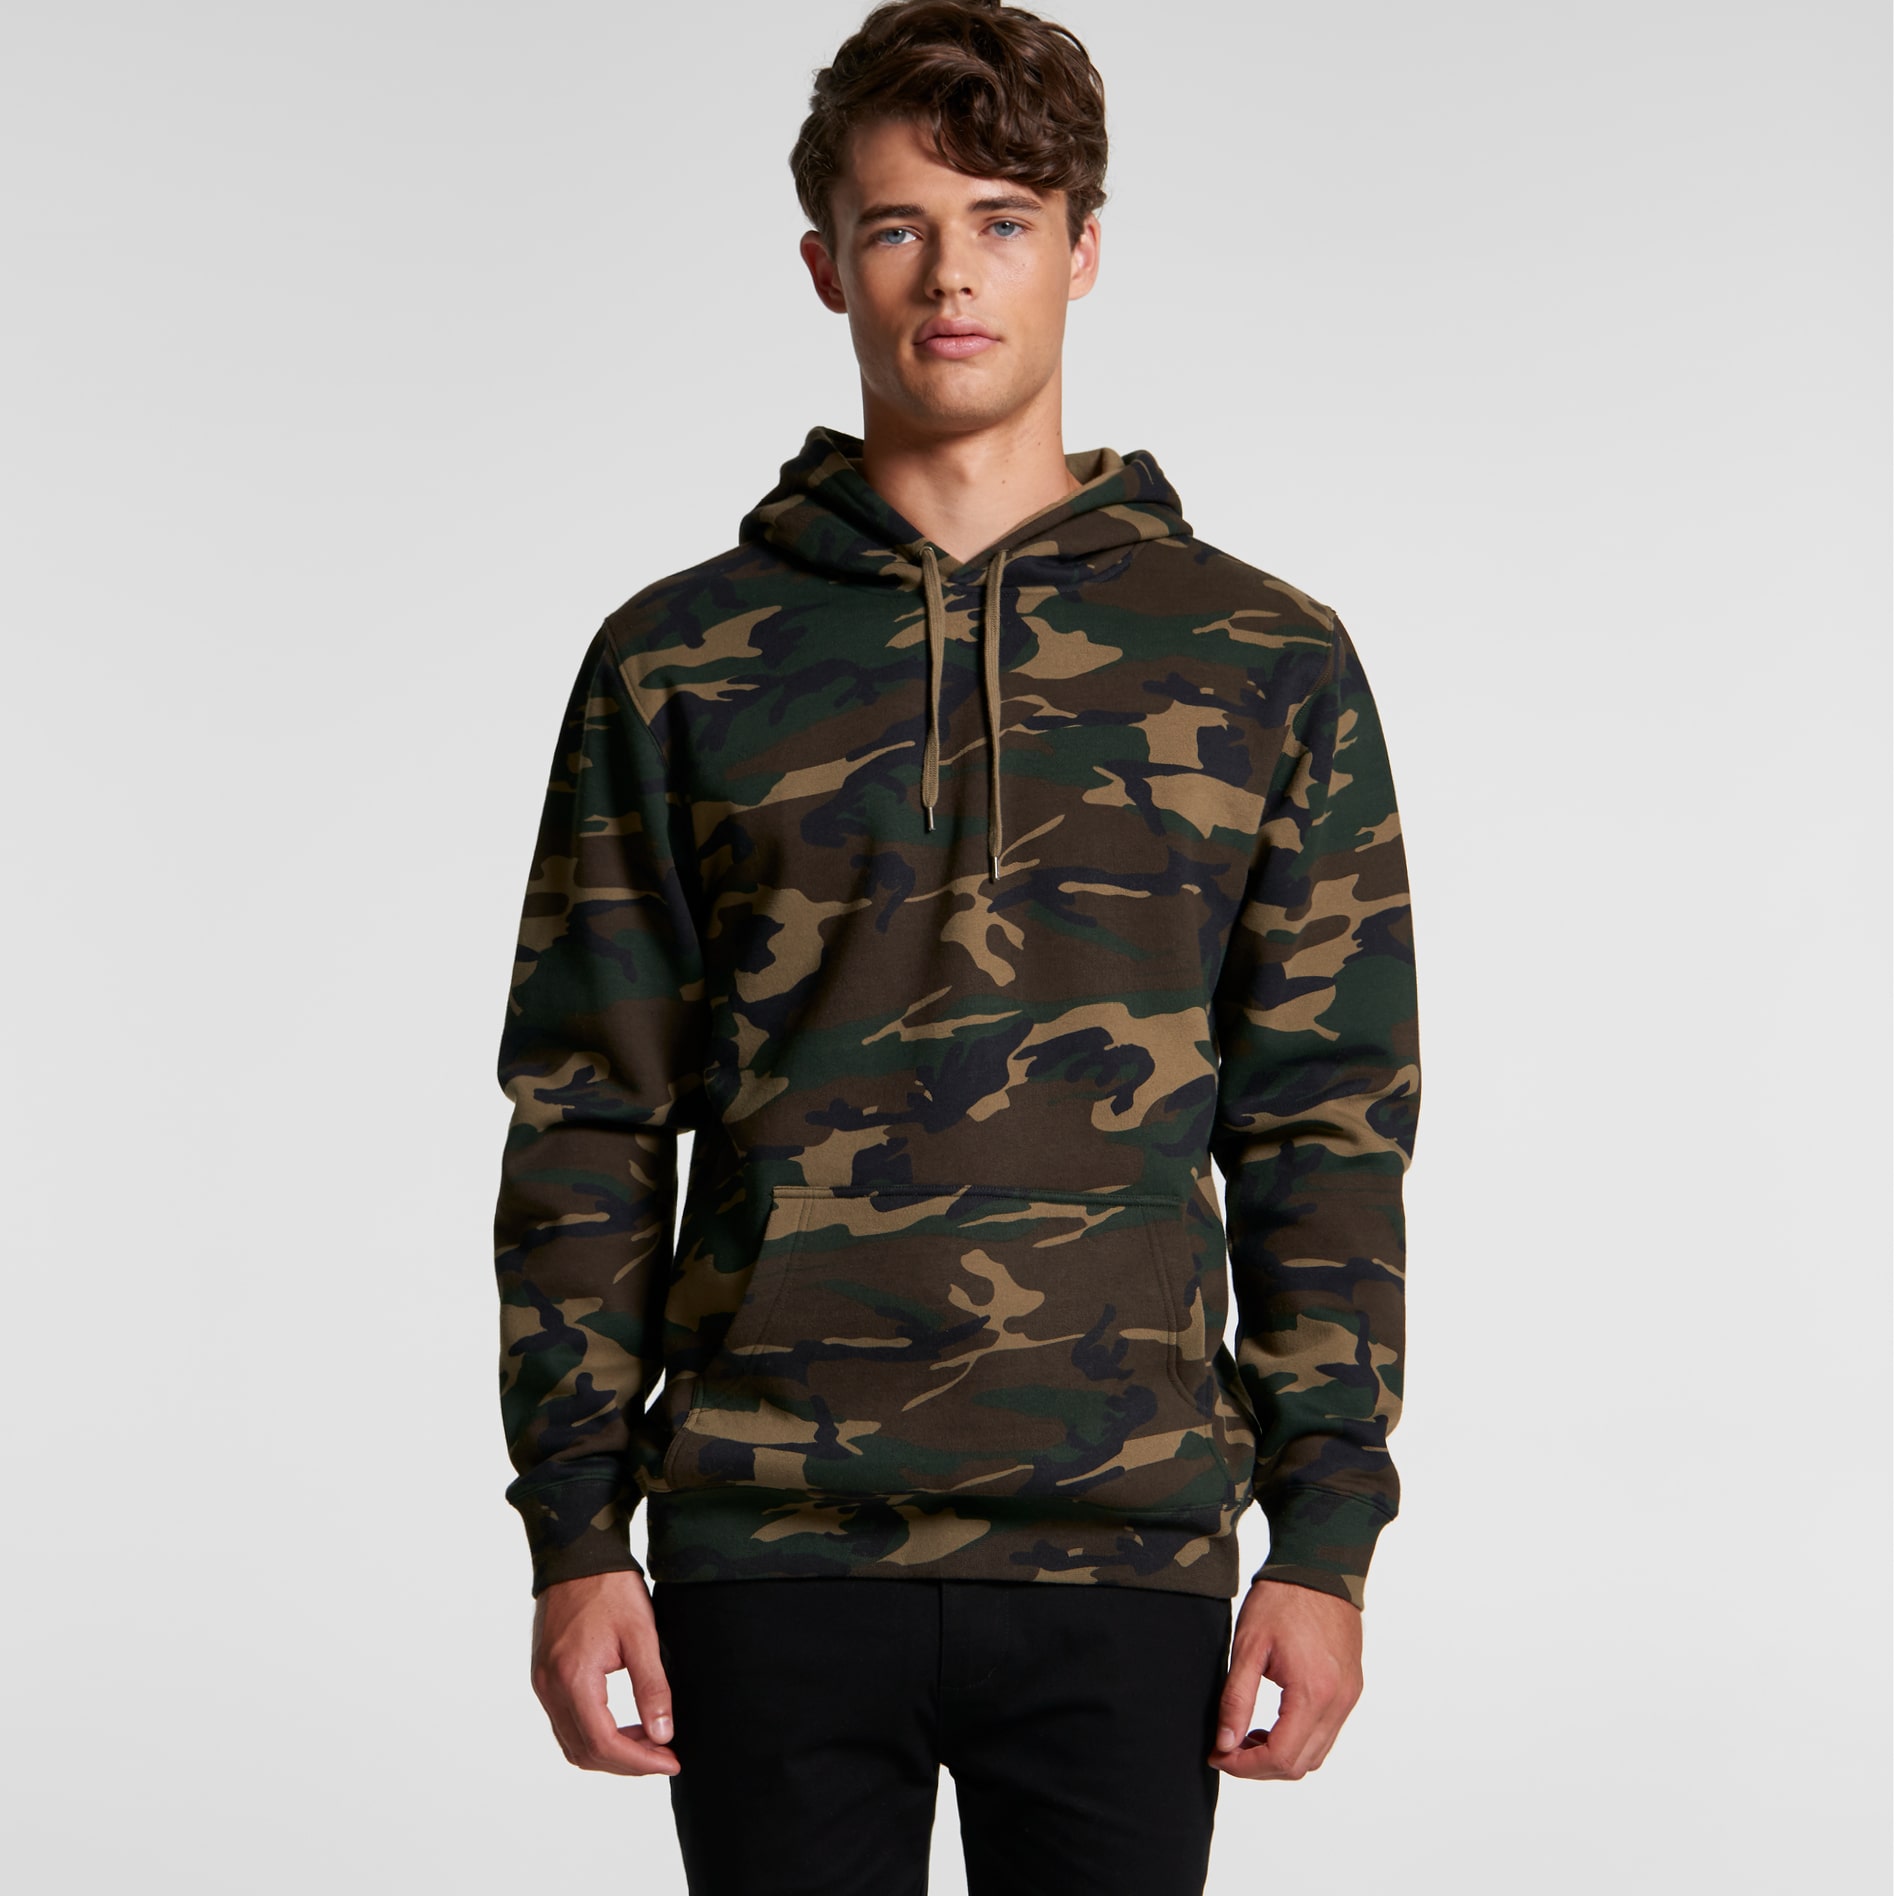 The 5 best hoodies to personalise - 5102c camo stencil hood front